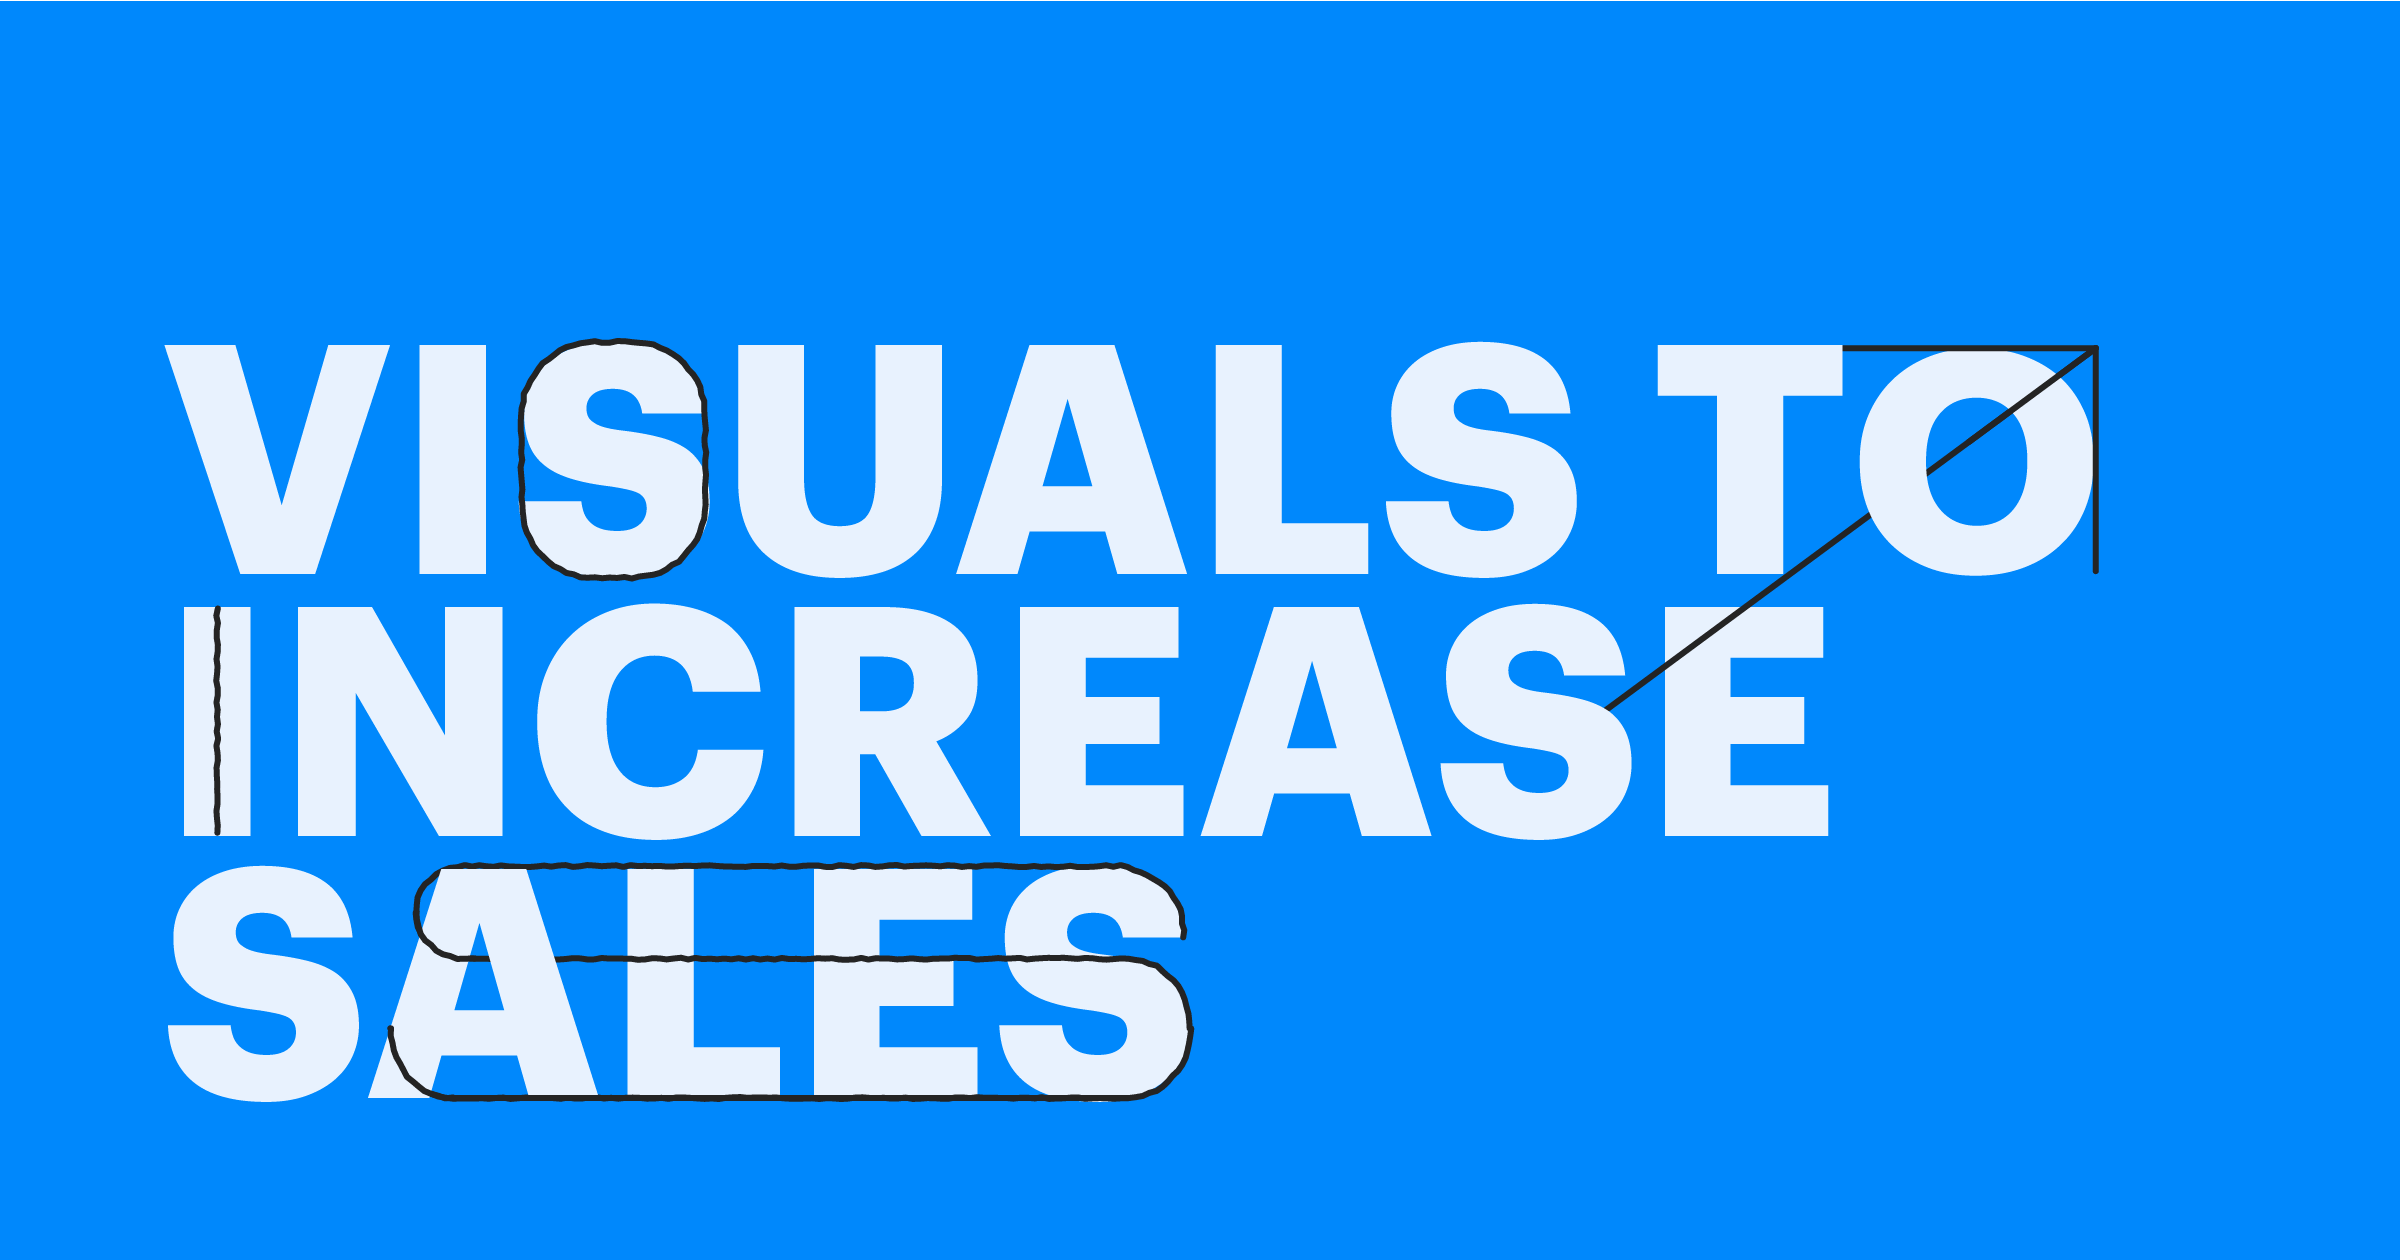 How to use visuals to increase sales conversions